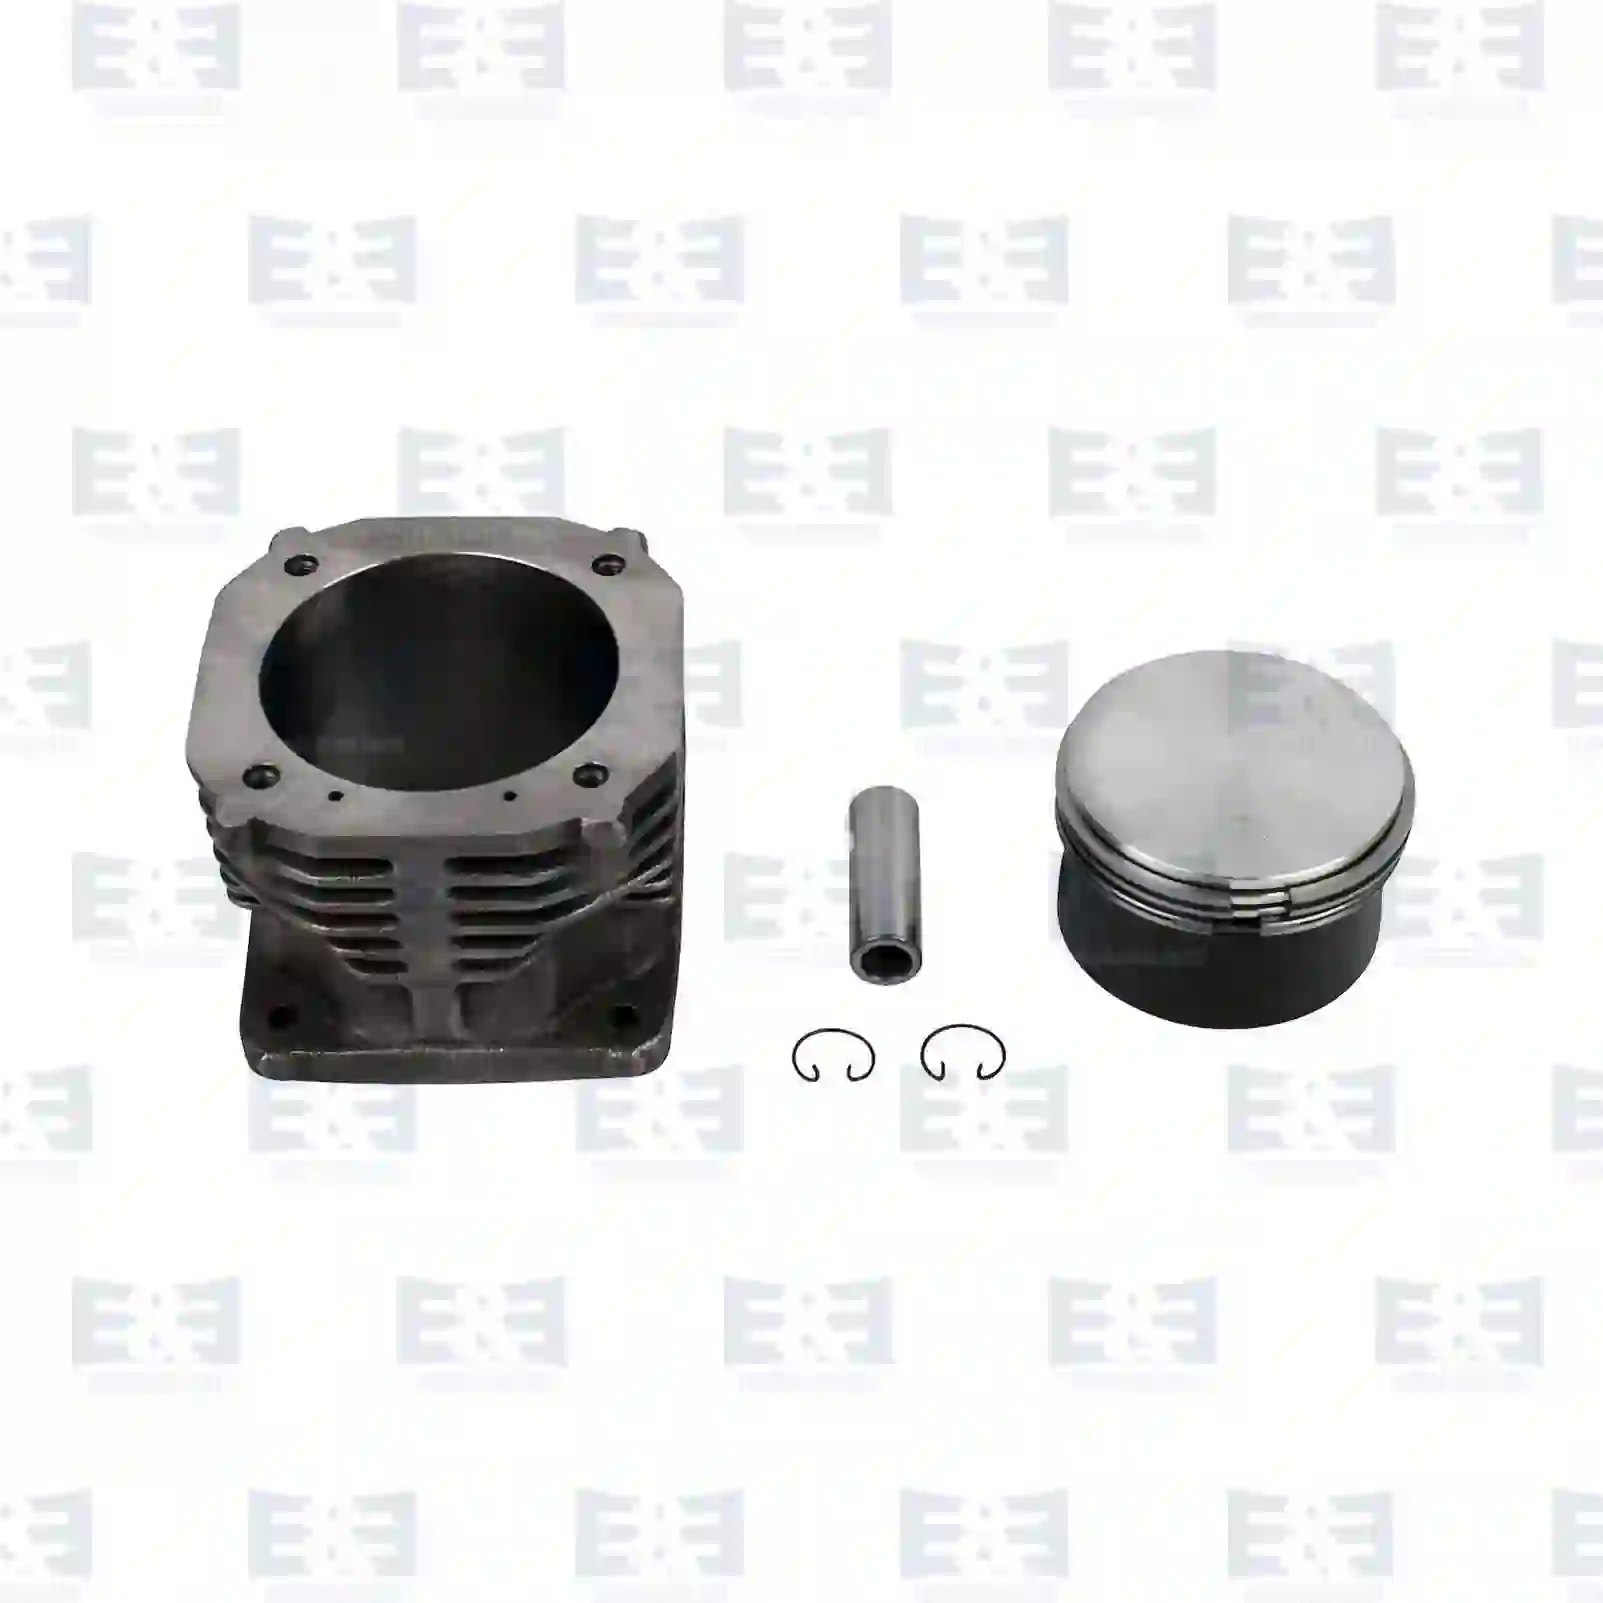 Compressor Piston and liner kit, air cooled, EE No 2E2297232 ,  oem no:51541050003, 51541050007, 51541056003, 51541056006, 51541190001, 51541190003, 51541190005, 51541190006, 51541190014, 51541197001, 51541197003, 51541197004, 4031300008, 4031300117, 4031310002, 4031311002, 4031312002, 4421300002, 4421300008, 4421300608, ZG50559-0008 E&E Truck Spare Parts | Truck Spare Parts, Auotomotive Spare Parts